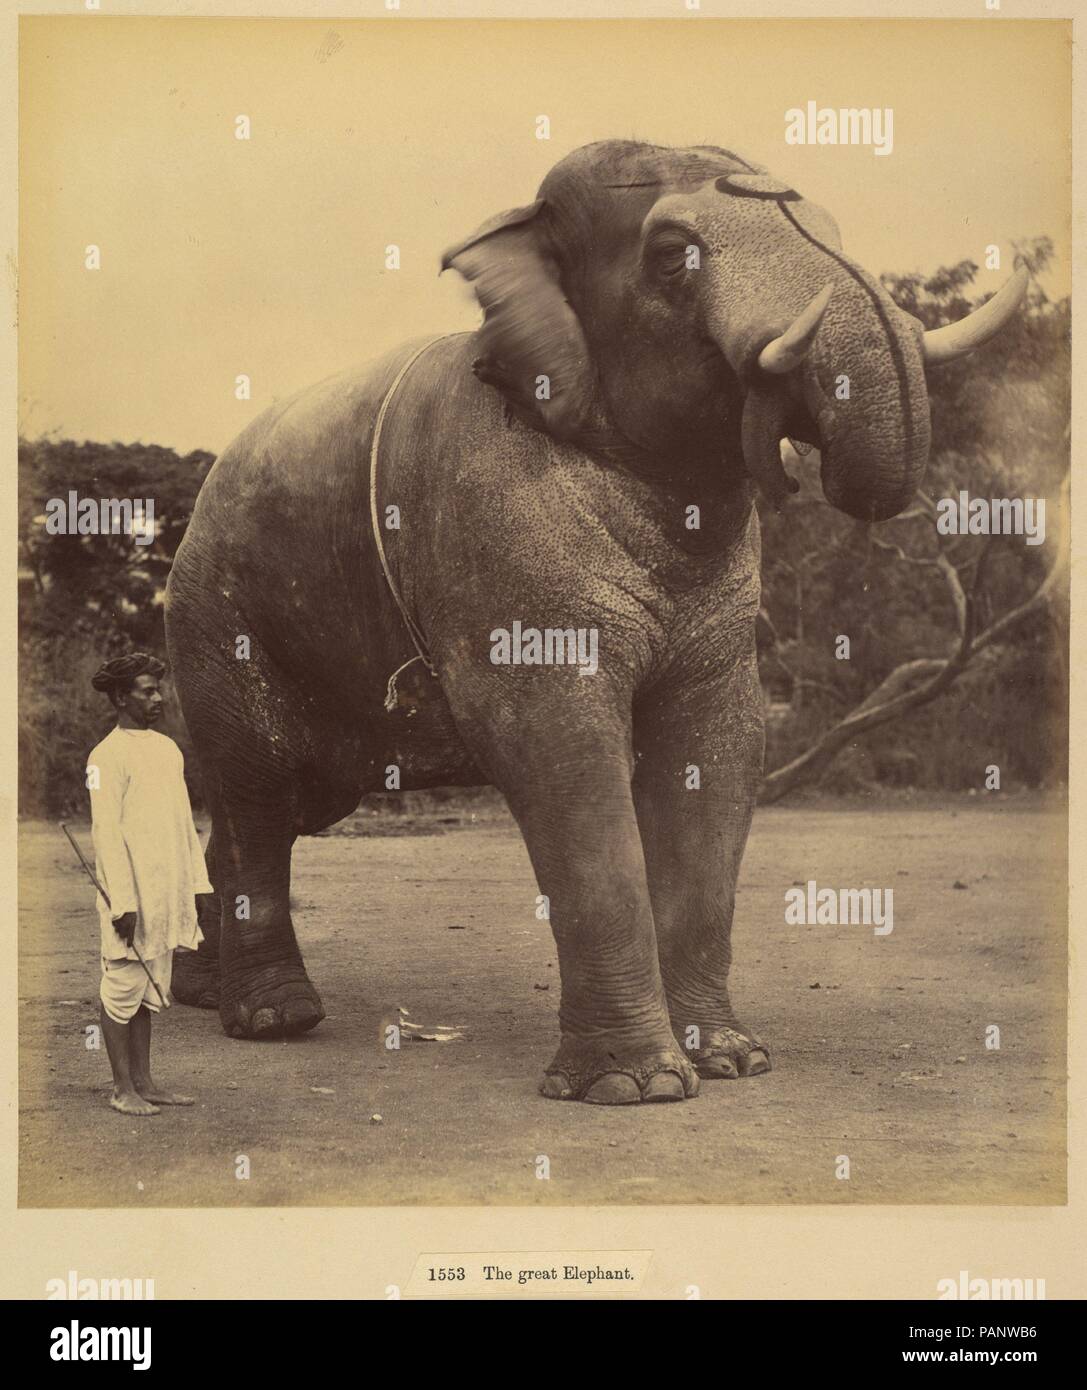 The Great Elephant. Artist: Lala Deen Dayal (Indian, Sardhana 1844-1905). Dimensions: Image: 24.1 x 21.2 cm (9 1/2 x 8 3/8 in.)  Mount: 30 x 37.7 cm (11 13/16 x 14 13/16 in.). Date: 1885-1900. Museum: Metropolitan Museum of Art, New York, USA. Stock Photo